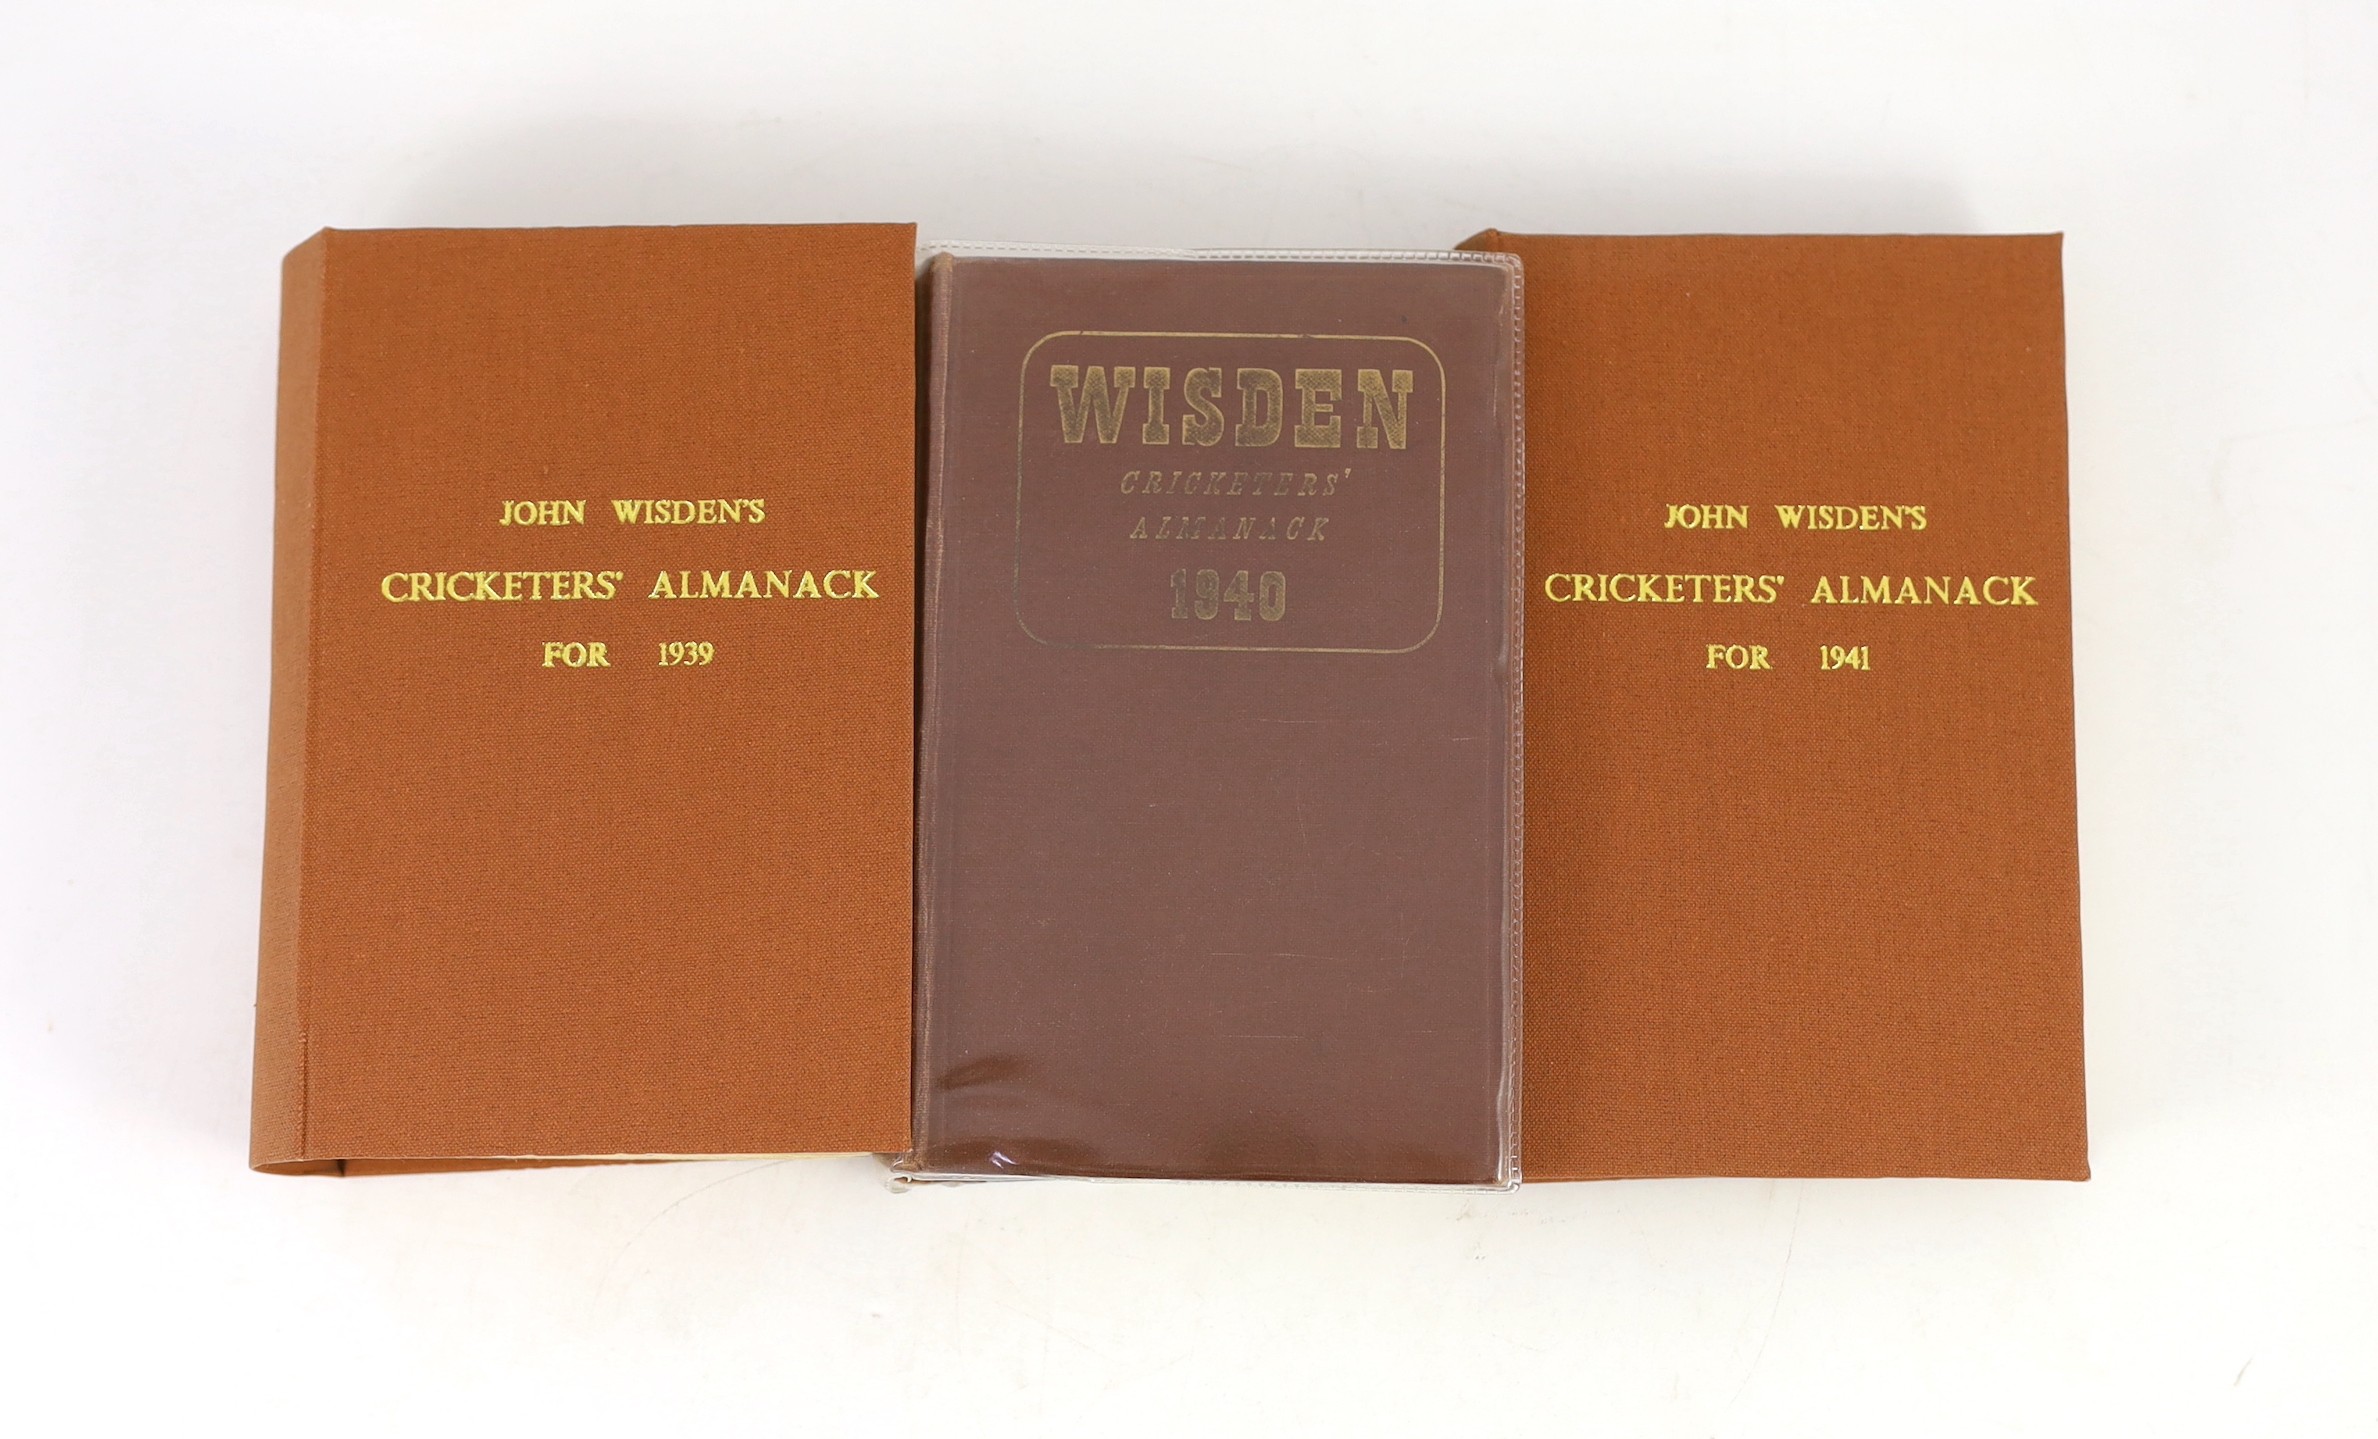 Wisden, John - Cricketers Almanack for the Second World War Years - 1939 (76th edition) - 1945 (82nd edition), rebound issues for 1939, 1941 and 1945, all retaining original paper wrappers, original hardbacks for 1940 an